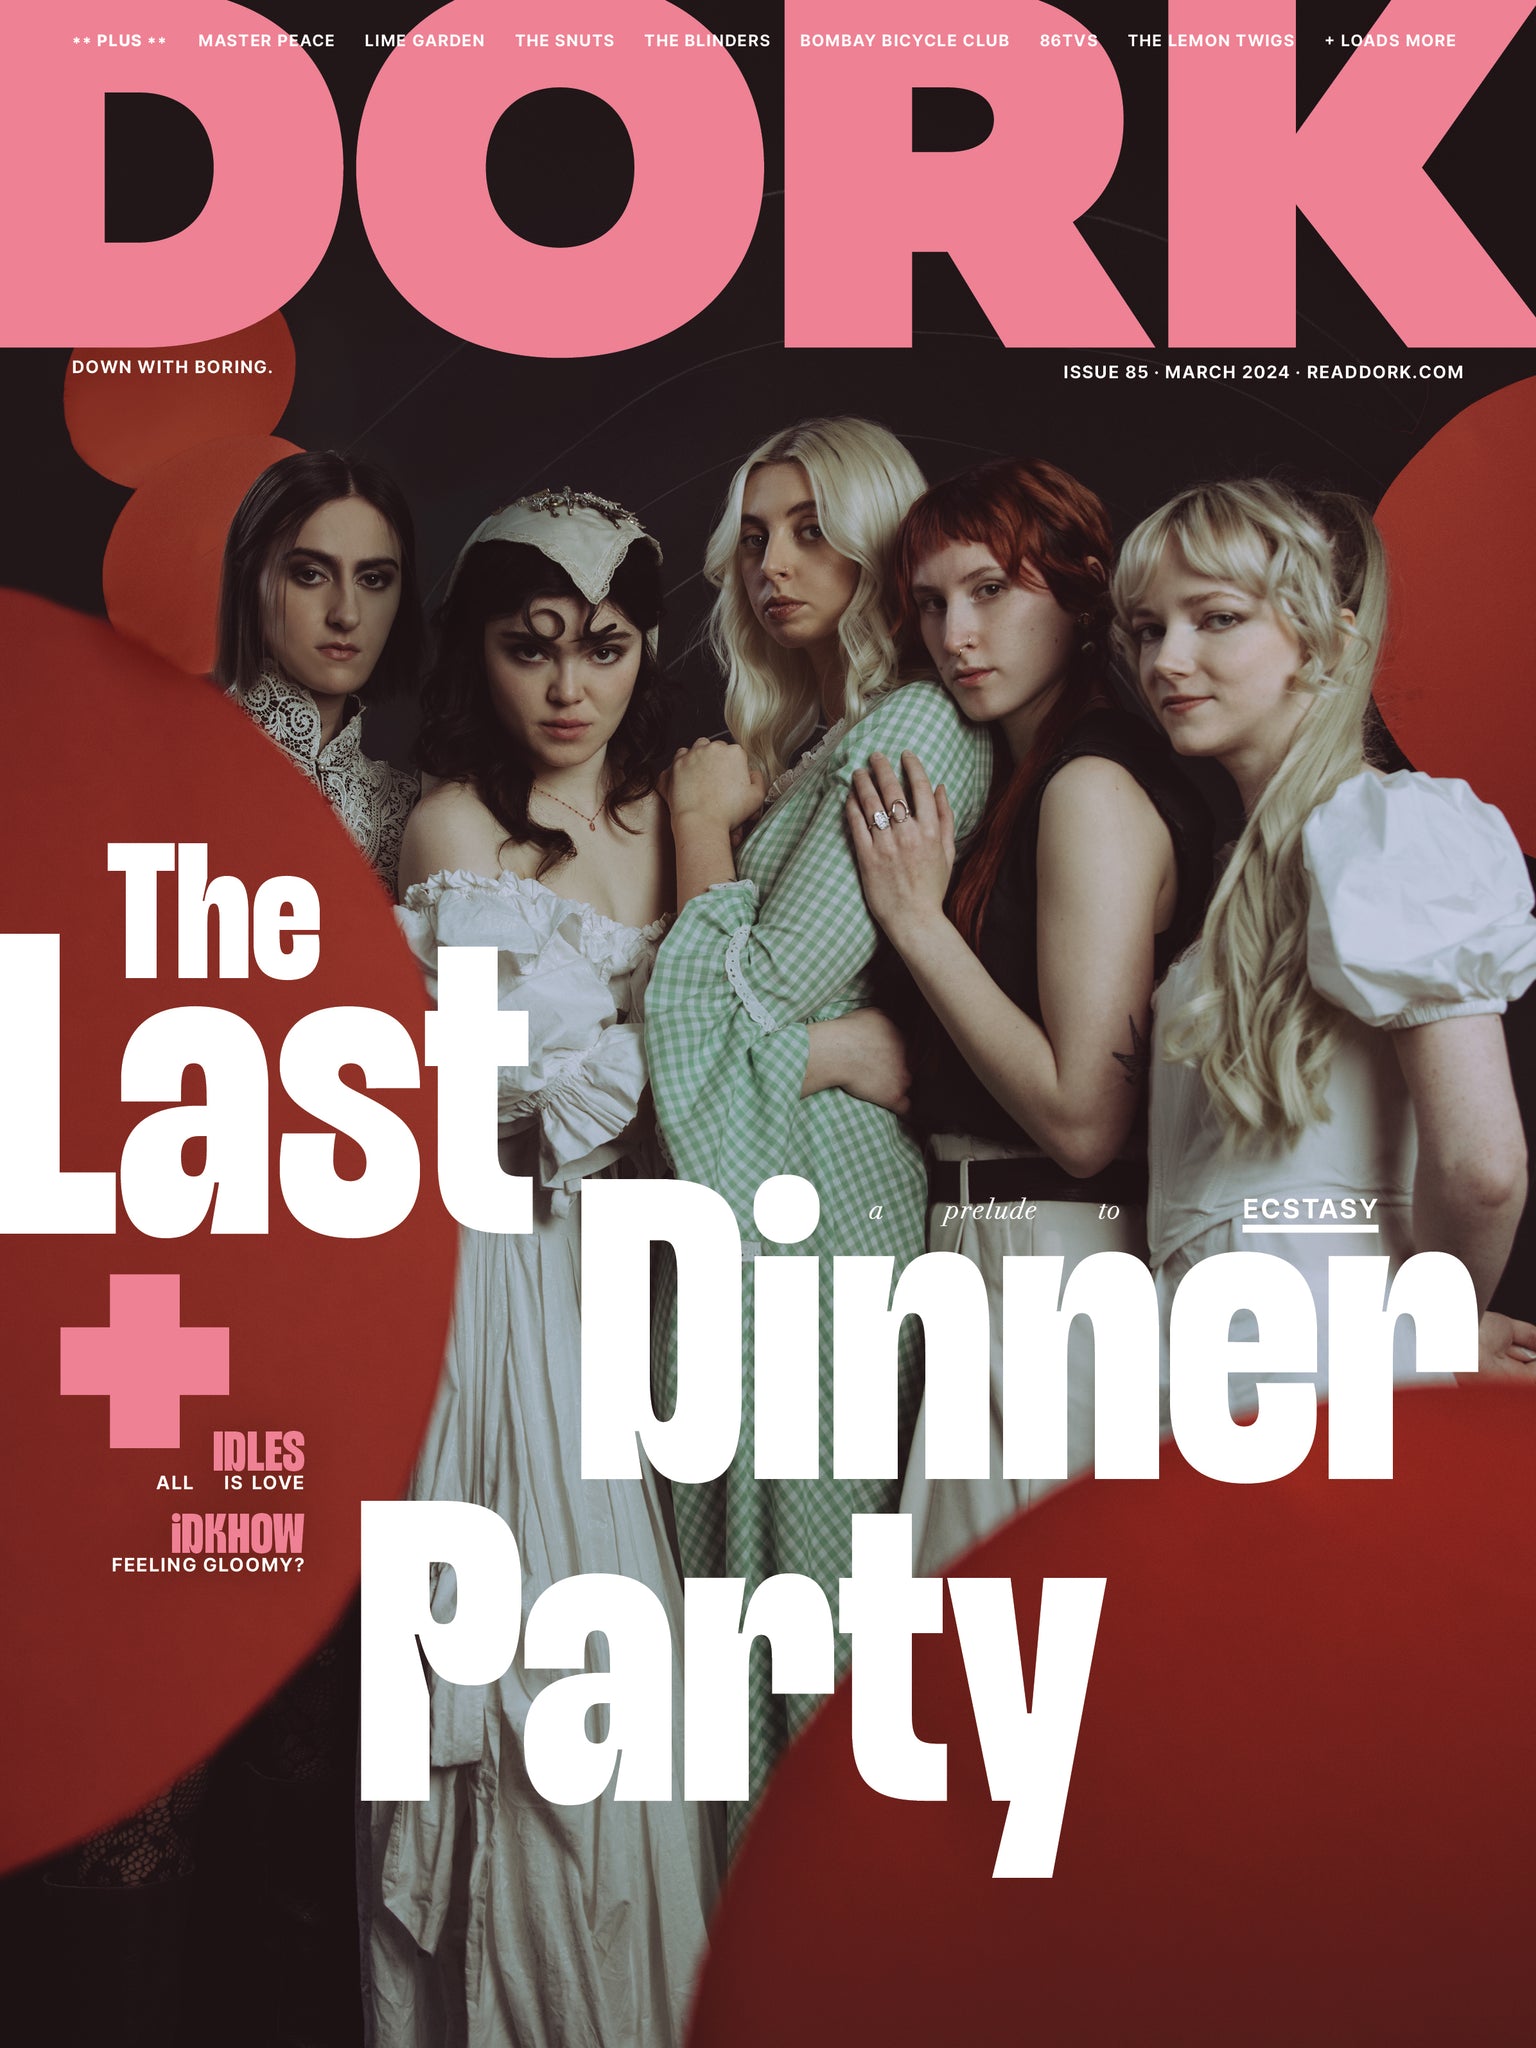 Dork, March 2024 (The Last Dinner Party cover)